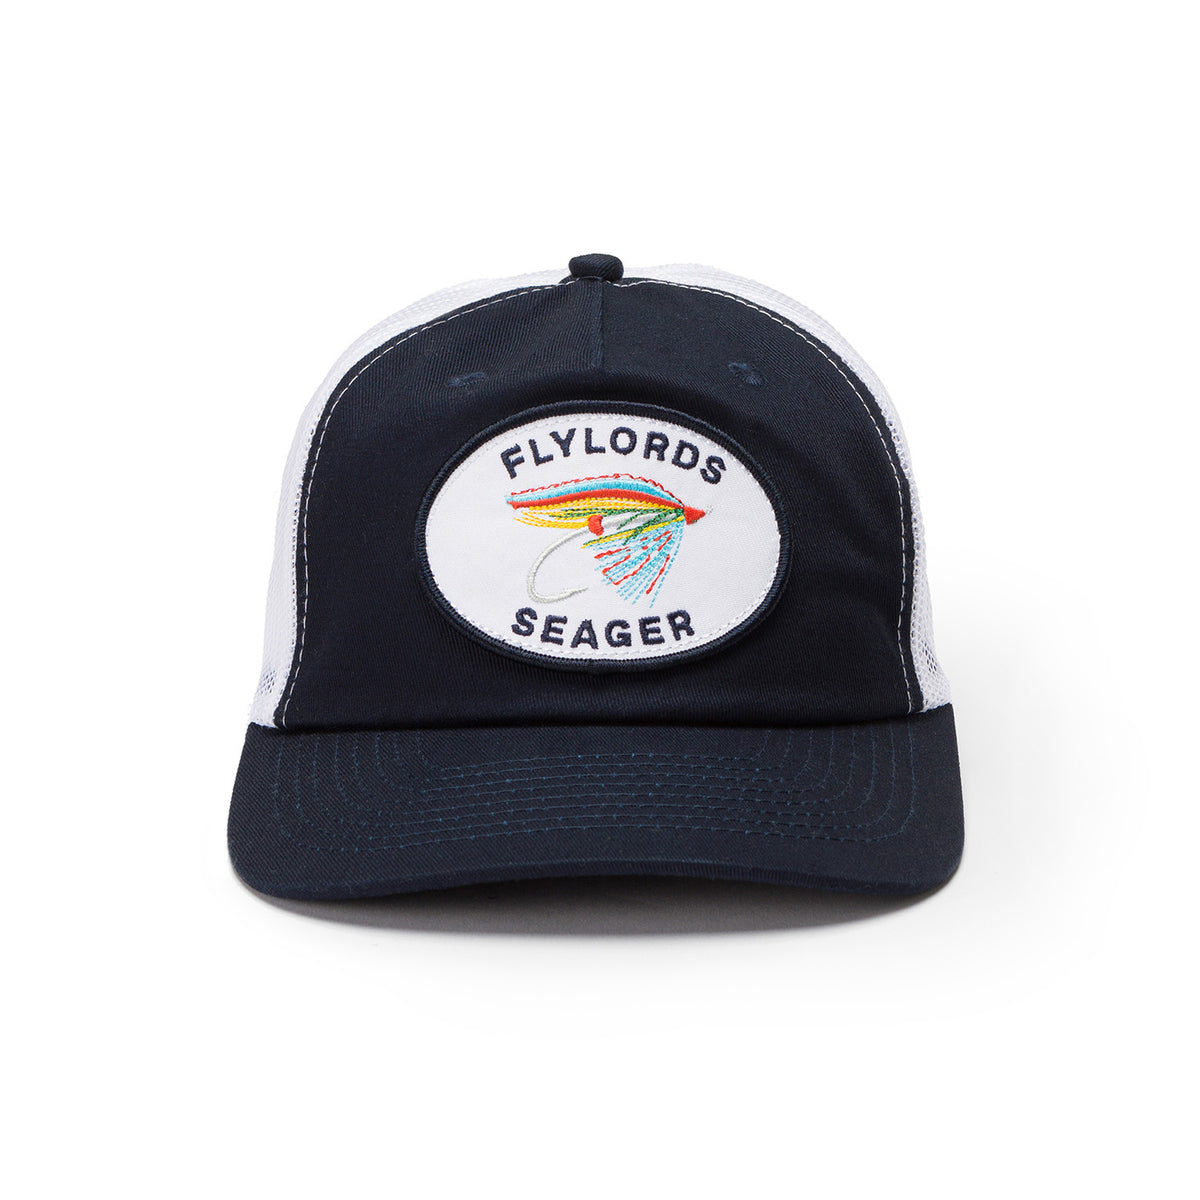 Seager X Flylords Mesh Snapback Navy – Flylords Store